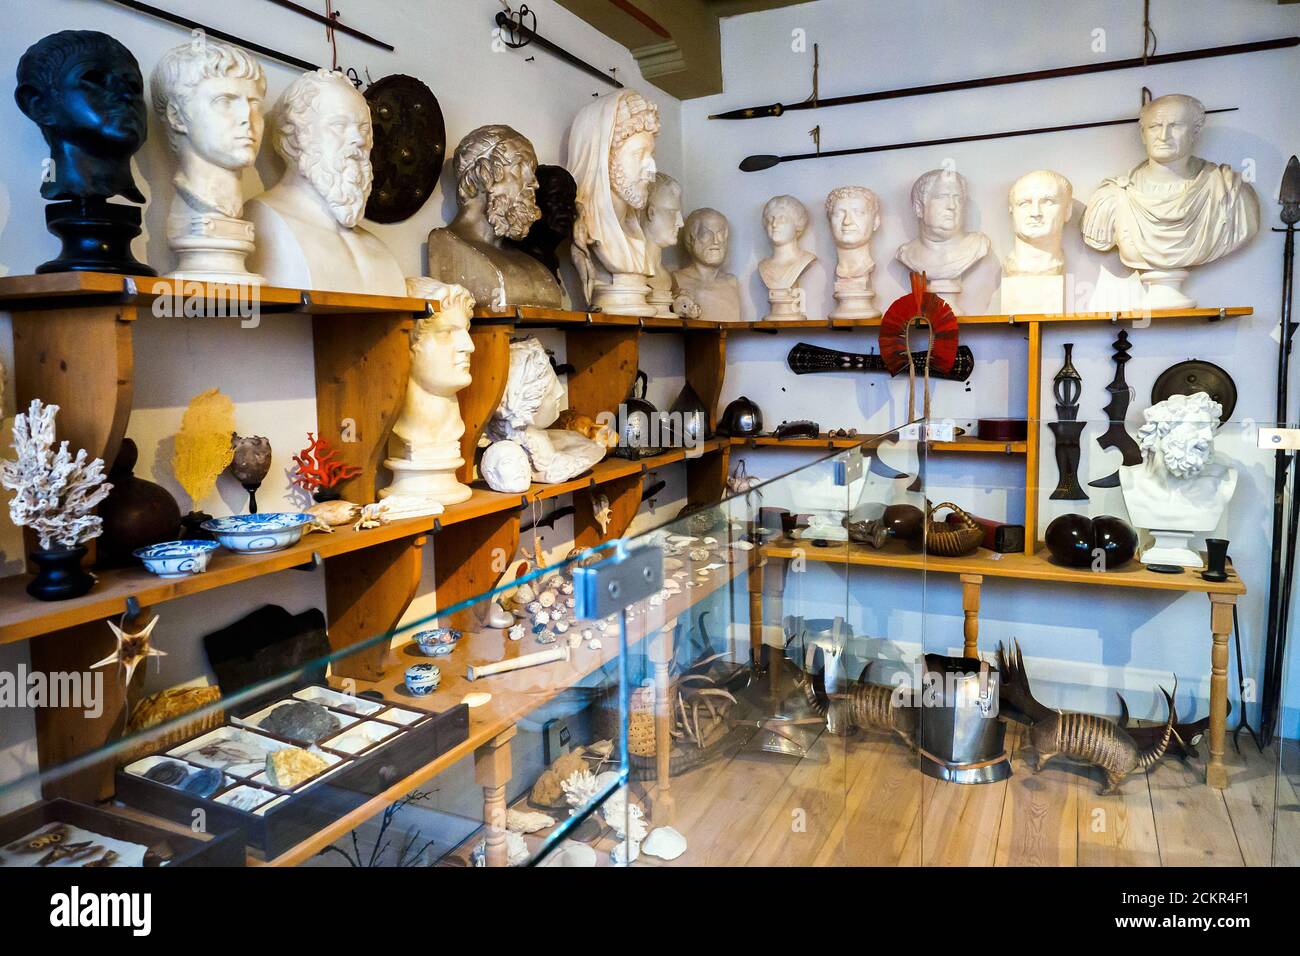 Objects in the large studio in the Rembrandthuis (house of Rembrandt's) Museum - Amsterdam, Netherlands Stock Photo